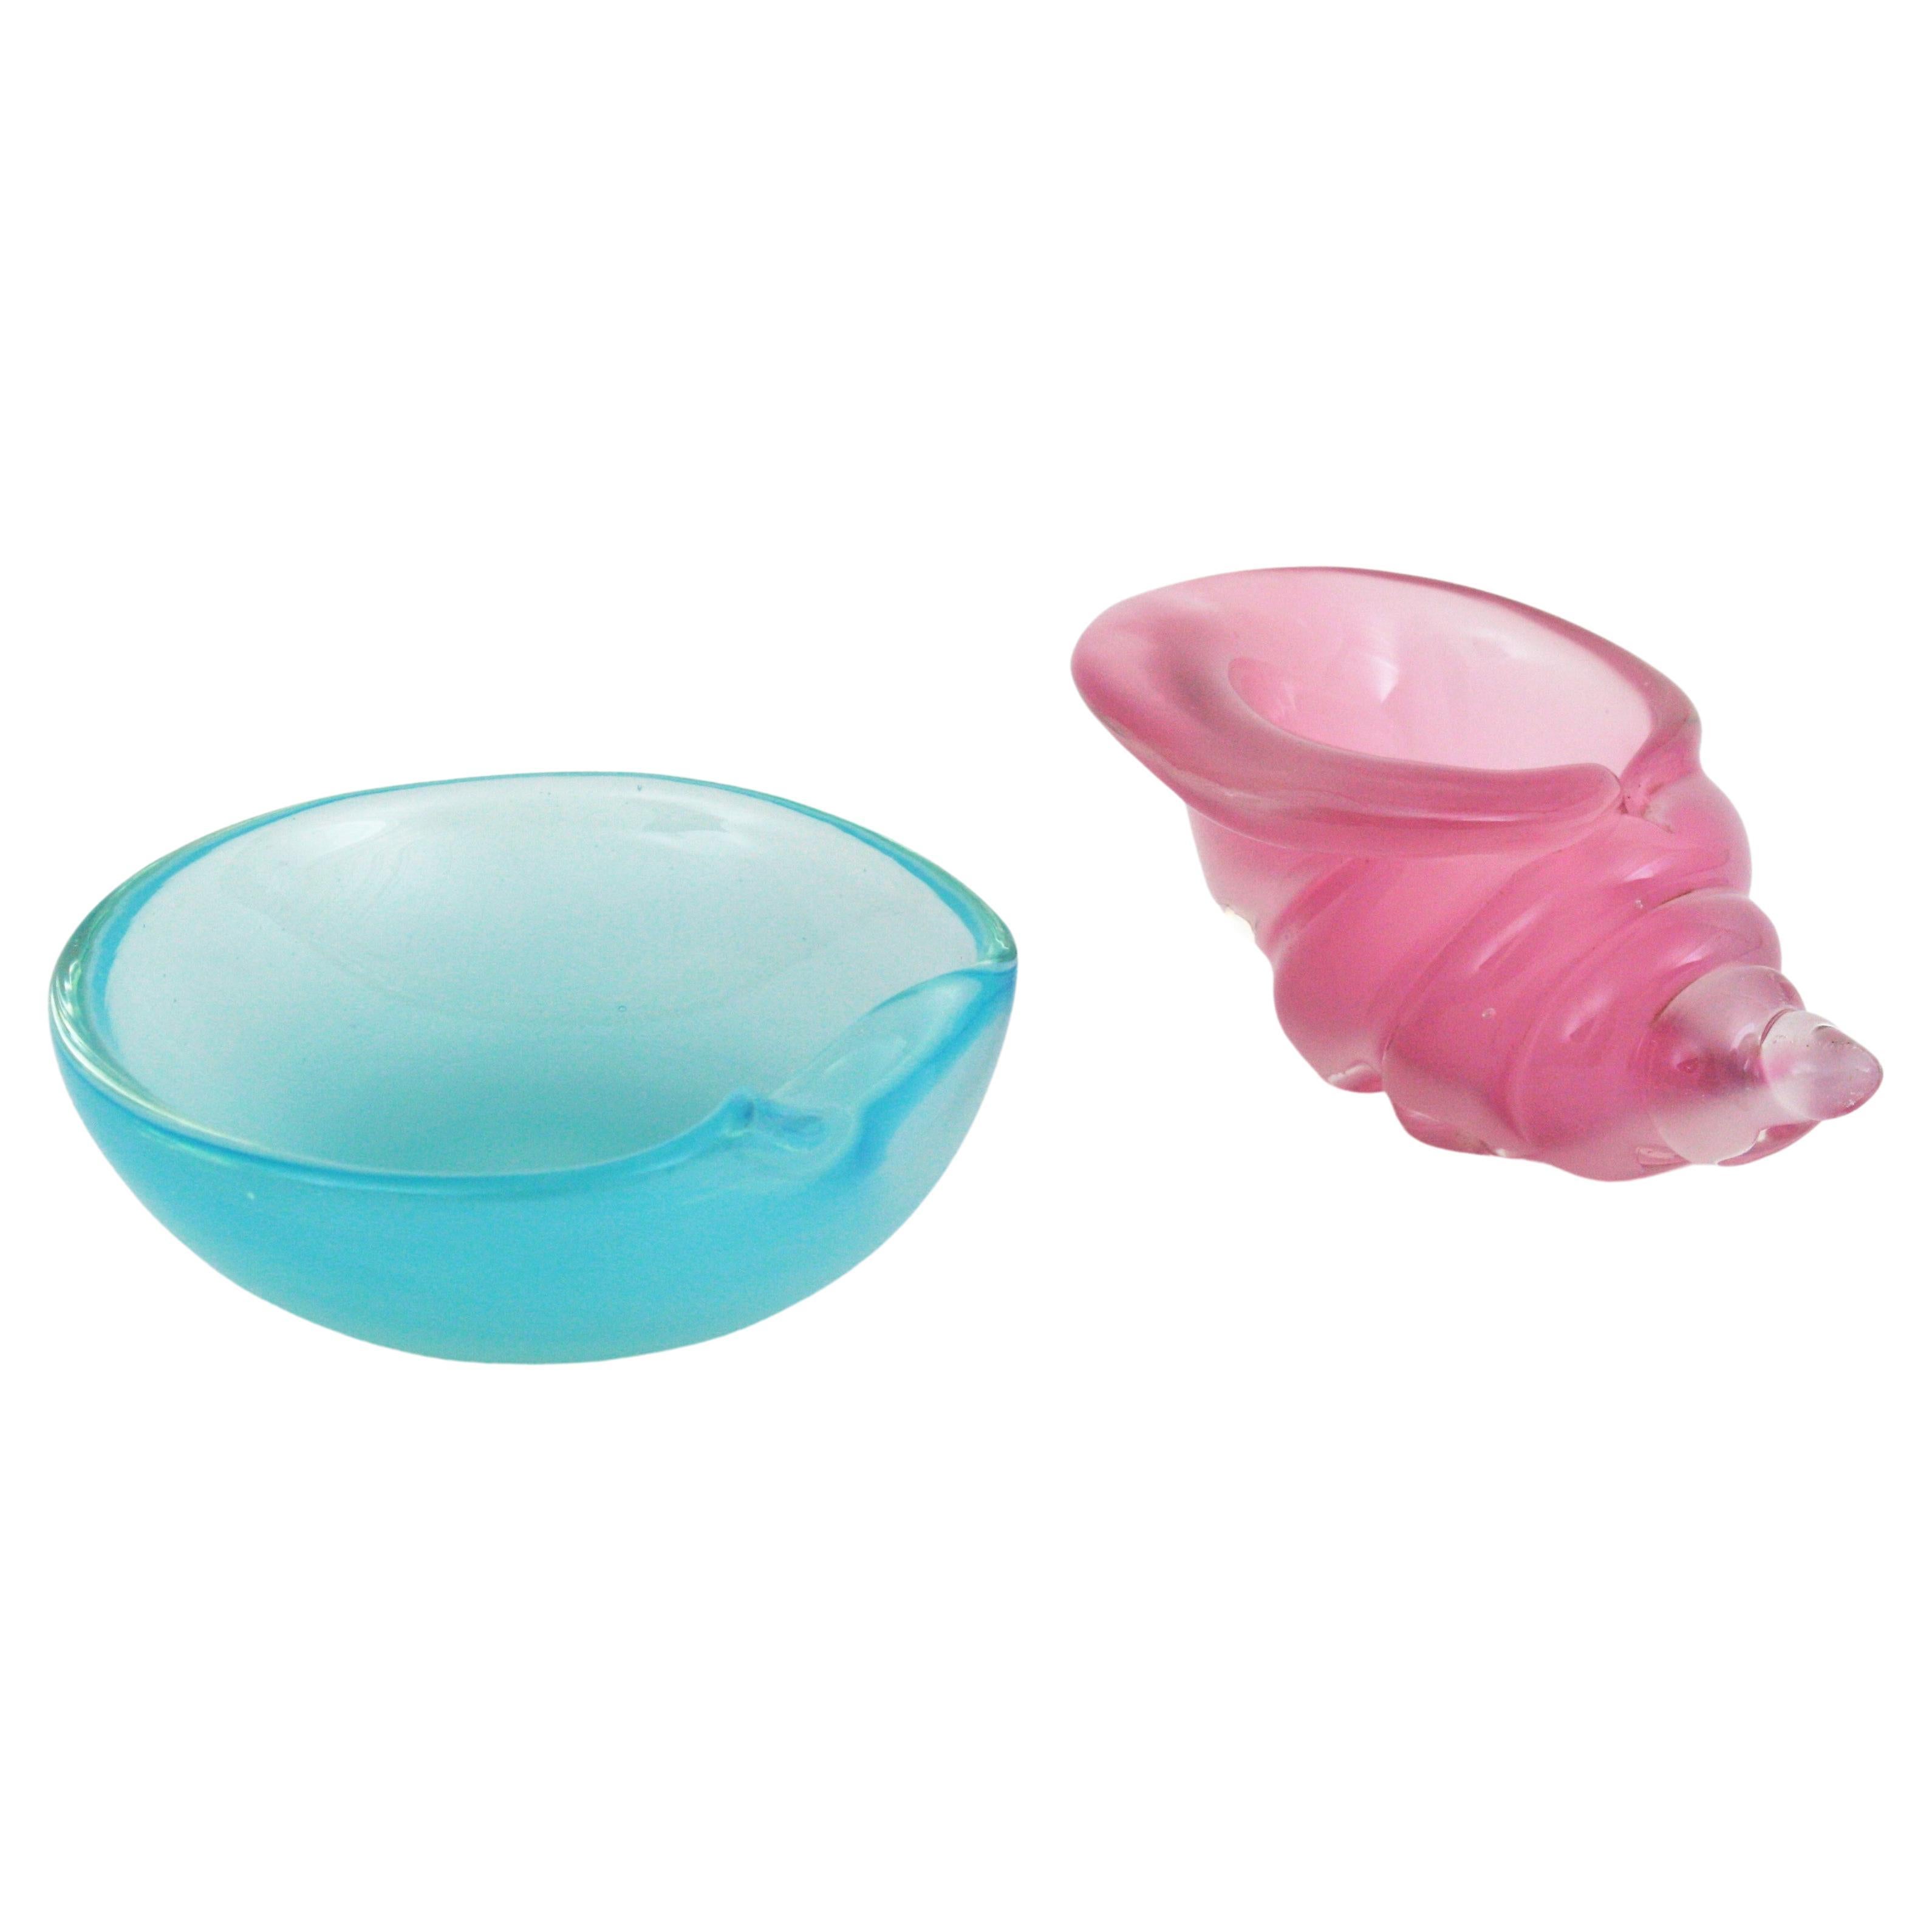 Pair of Murano Sommerso pink and blue opalescent glass shell bowls. Attributed to Archimede Seguso. Italy, 1950s.
Pink and blue opalescent glass in the Alabastro design cased into clear glass using the Sommerso technique.
Eye-catching set